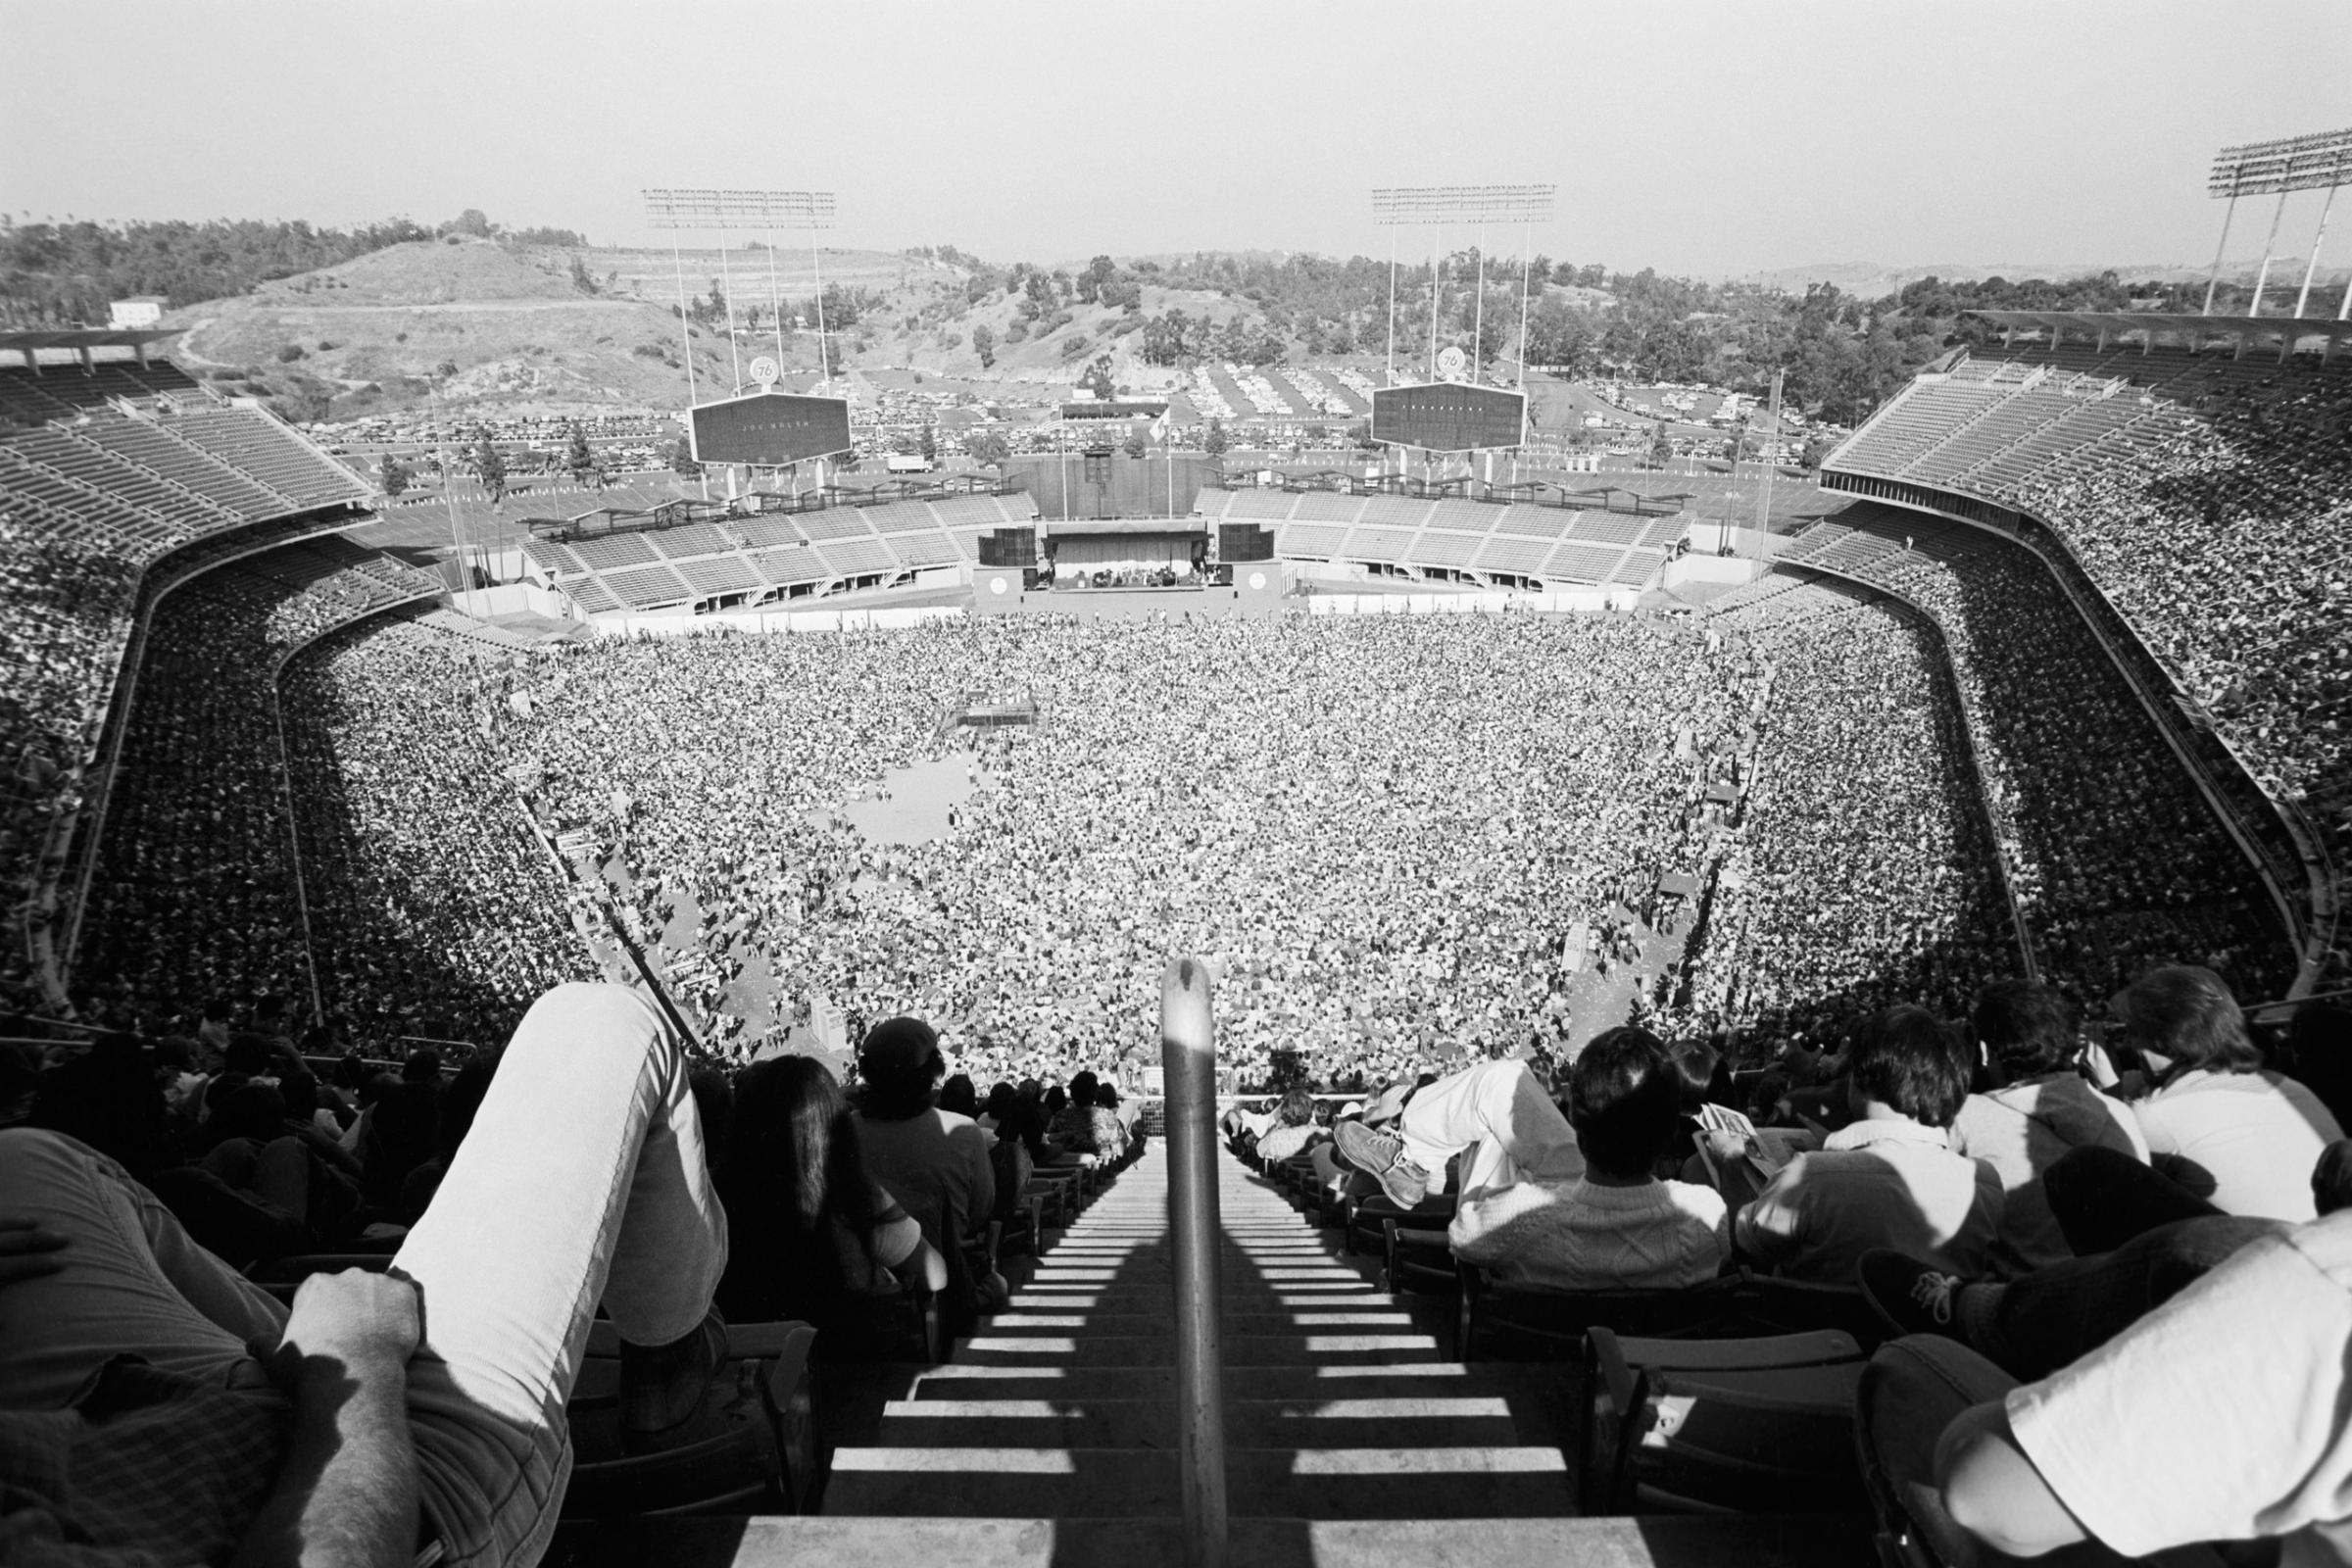 “I had to climb to the top of the stadium to see what it looked like filled with that many people.” – Terry O’Neill